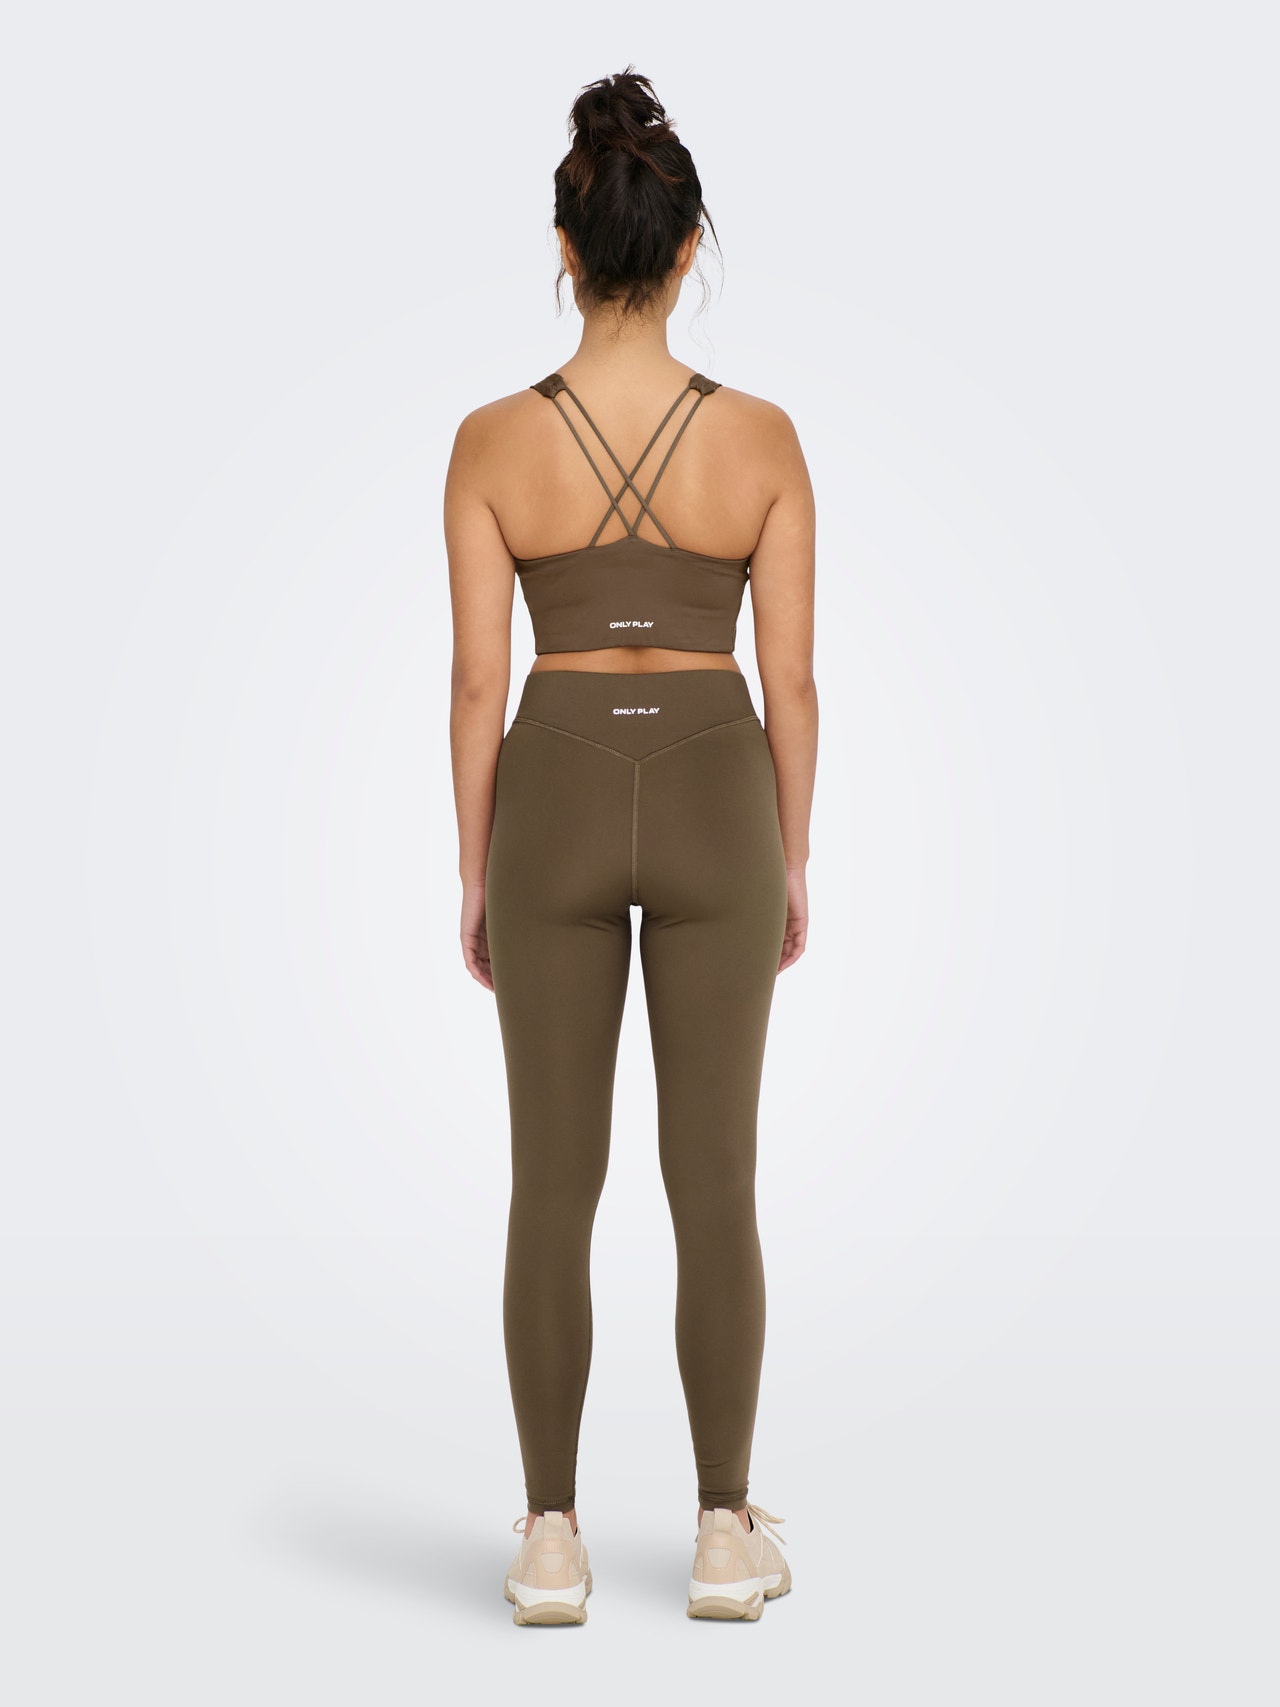 High waisted Training Tights with 30% discount!